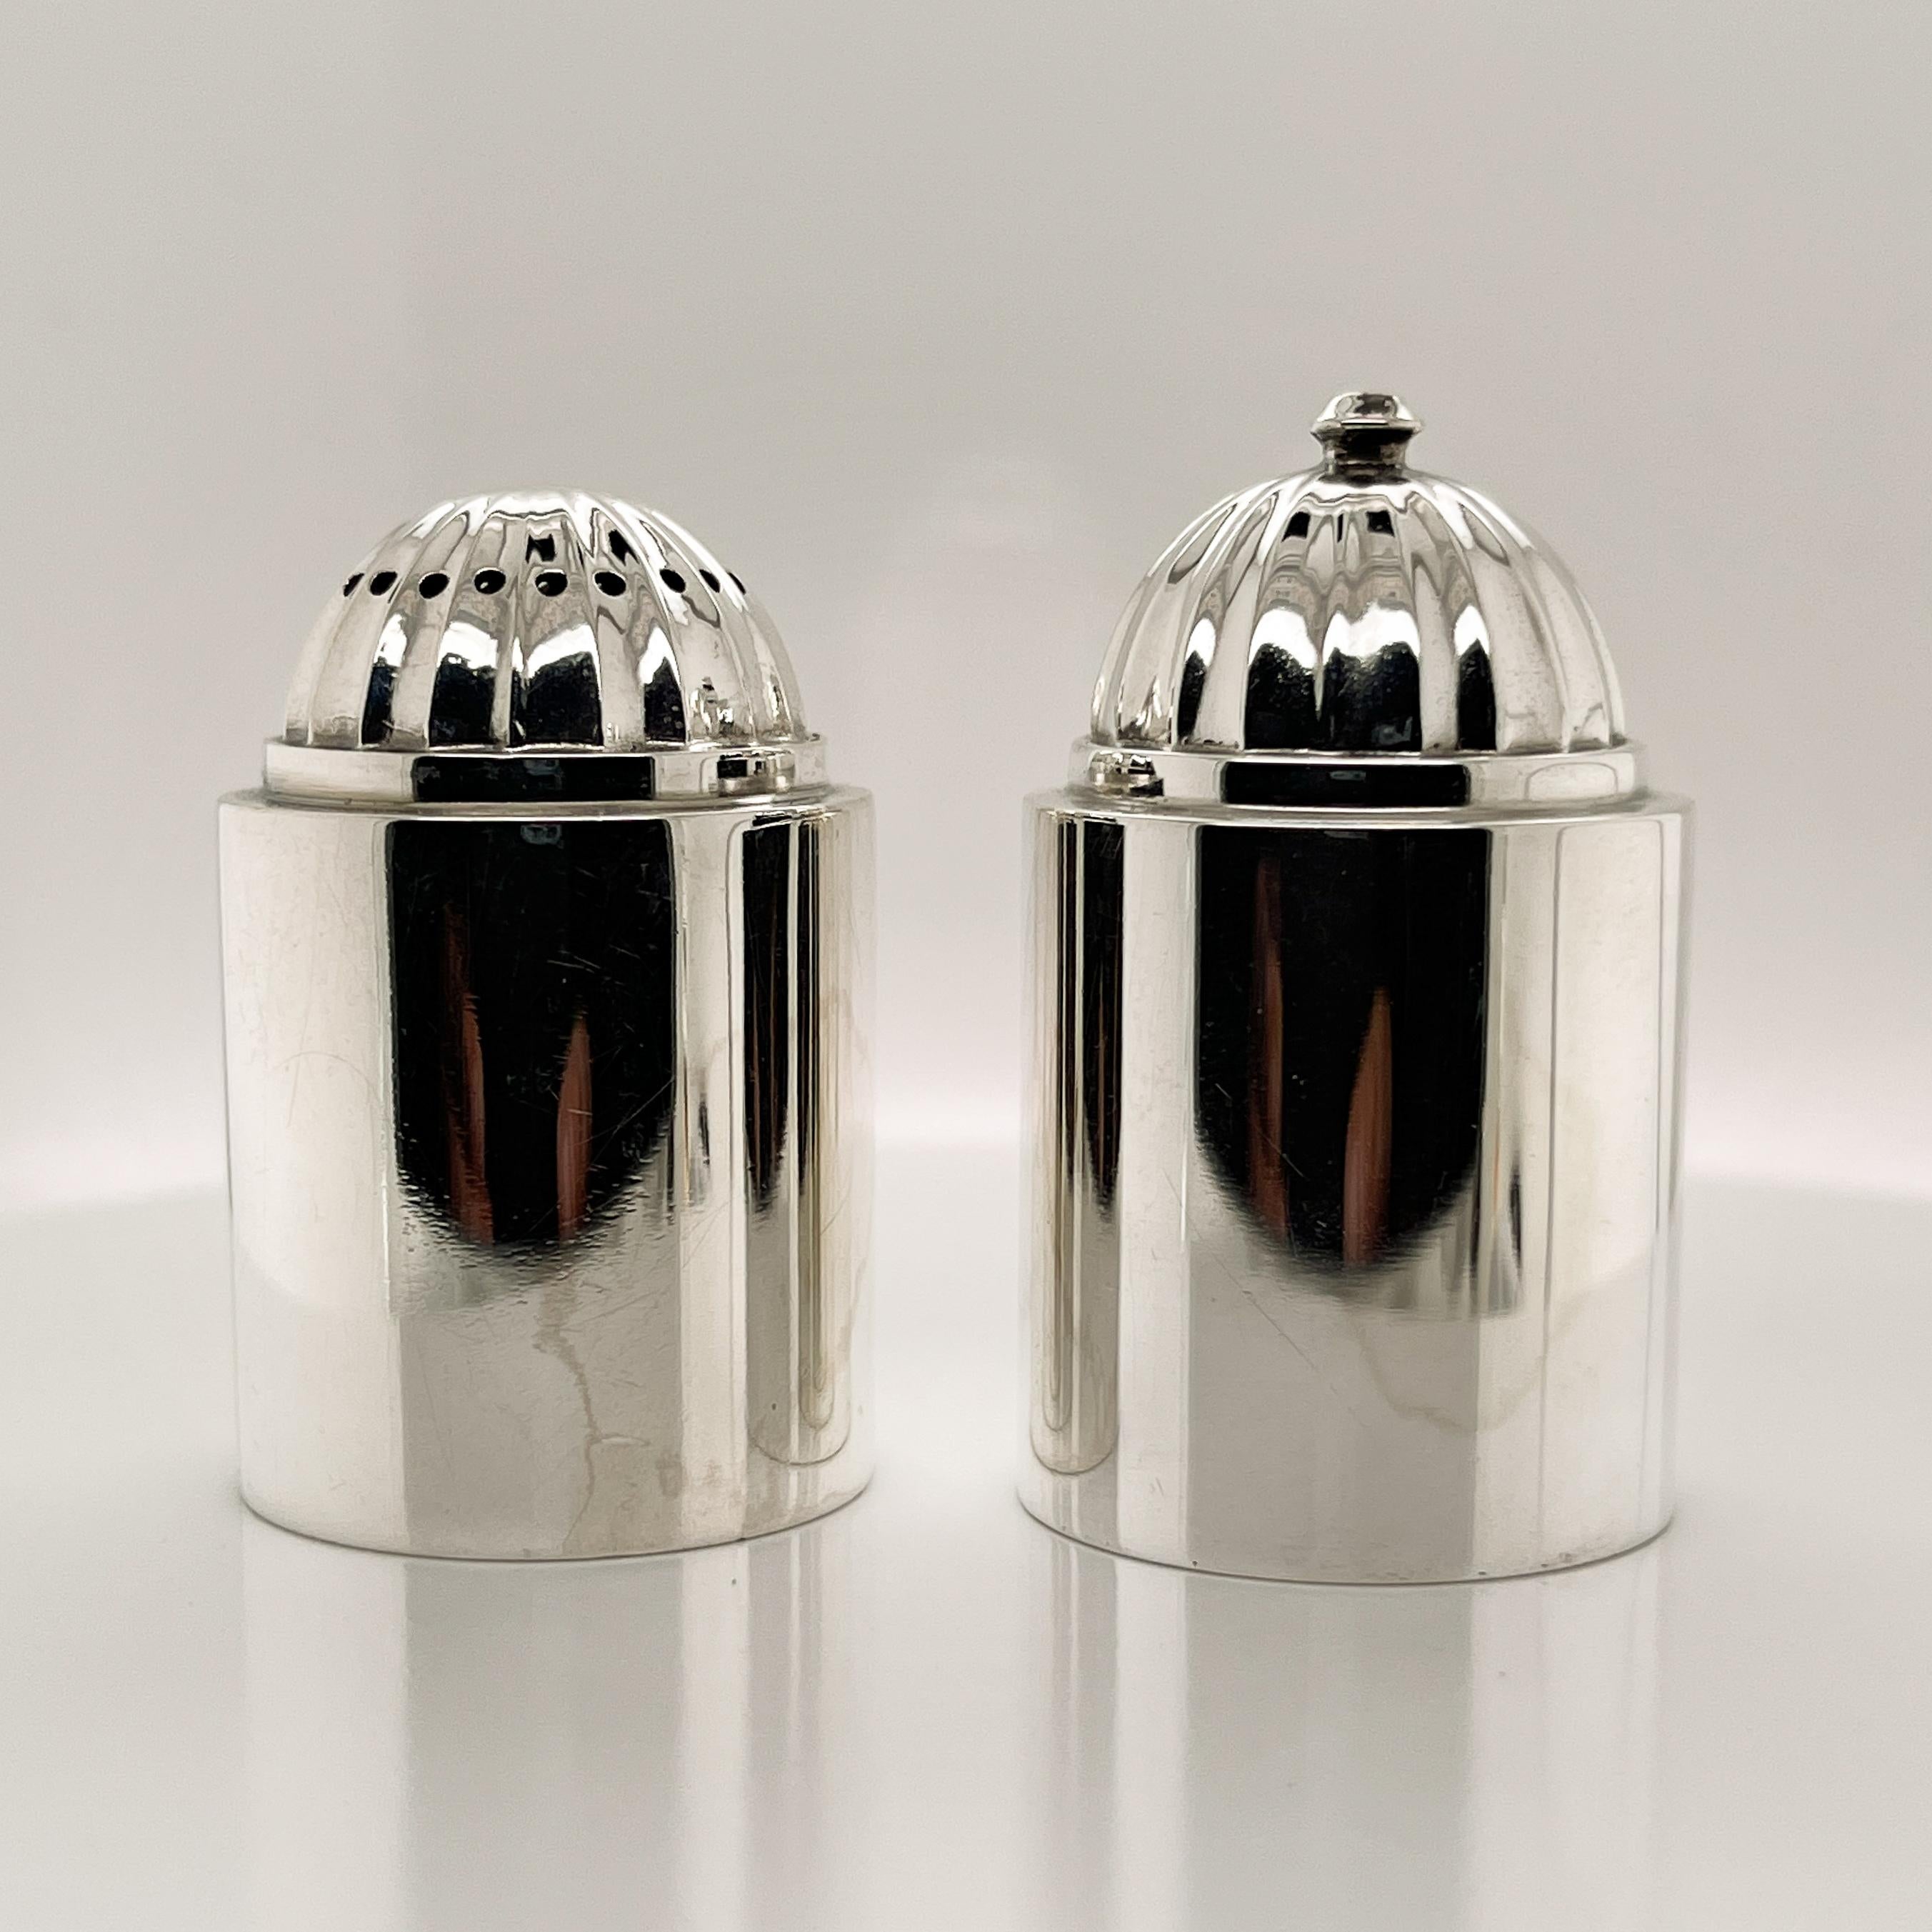 A pair of Georg Jensen sterling silver salt and pepper shakers.

Model No. 627. 

Designed by Ove Brobeck. 

A rare and fine pair!

Date:
20th Century

Overall Condition:
They are in overall, good, as-pictured, used estate condition with some very